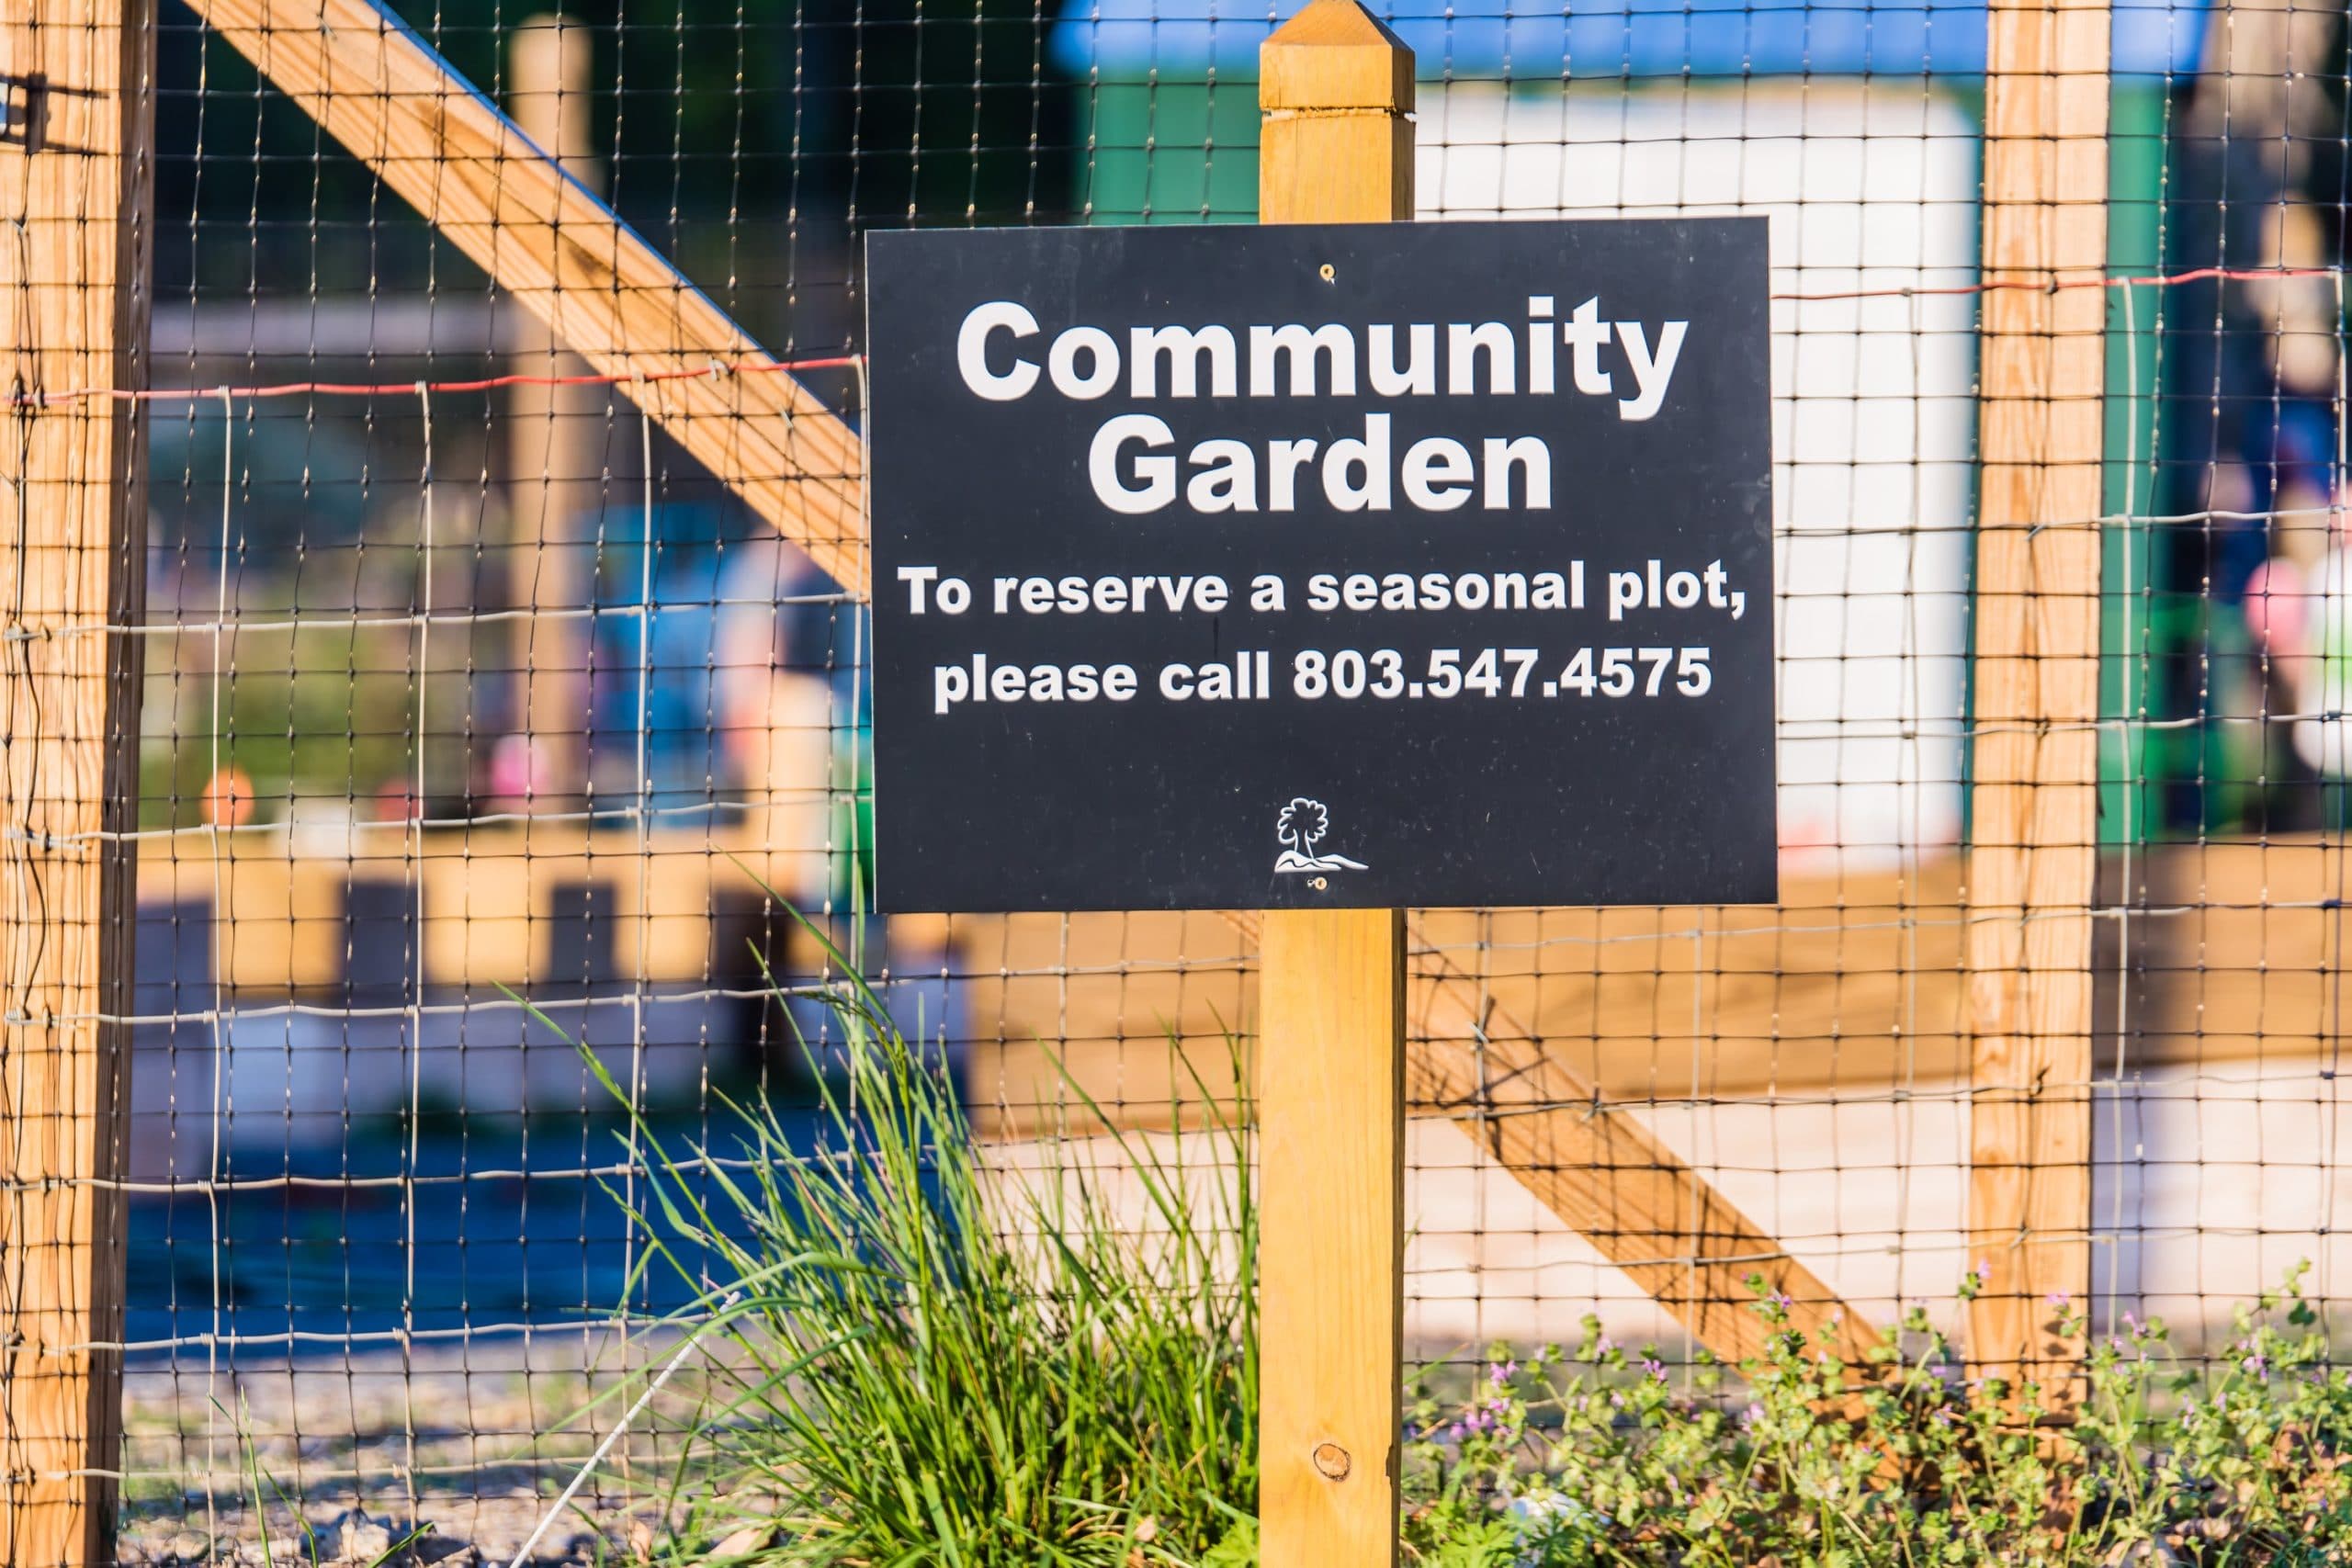 Photo of Plant-a-Row Community Garden with text reading "to reserve a seasonal plot, please call 803.547.4575" hanging on the fence